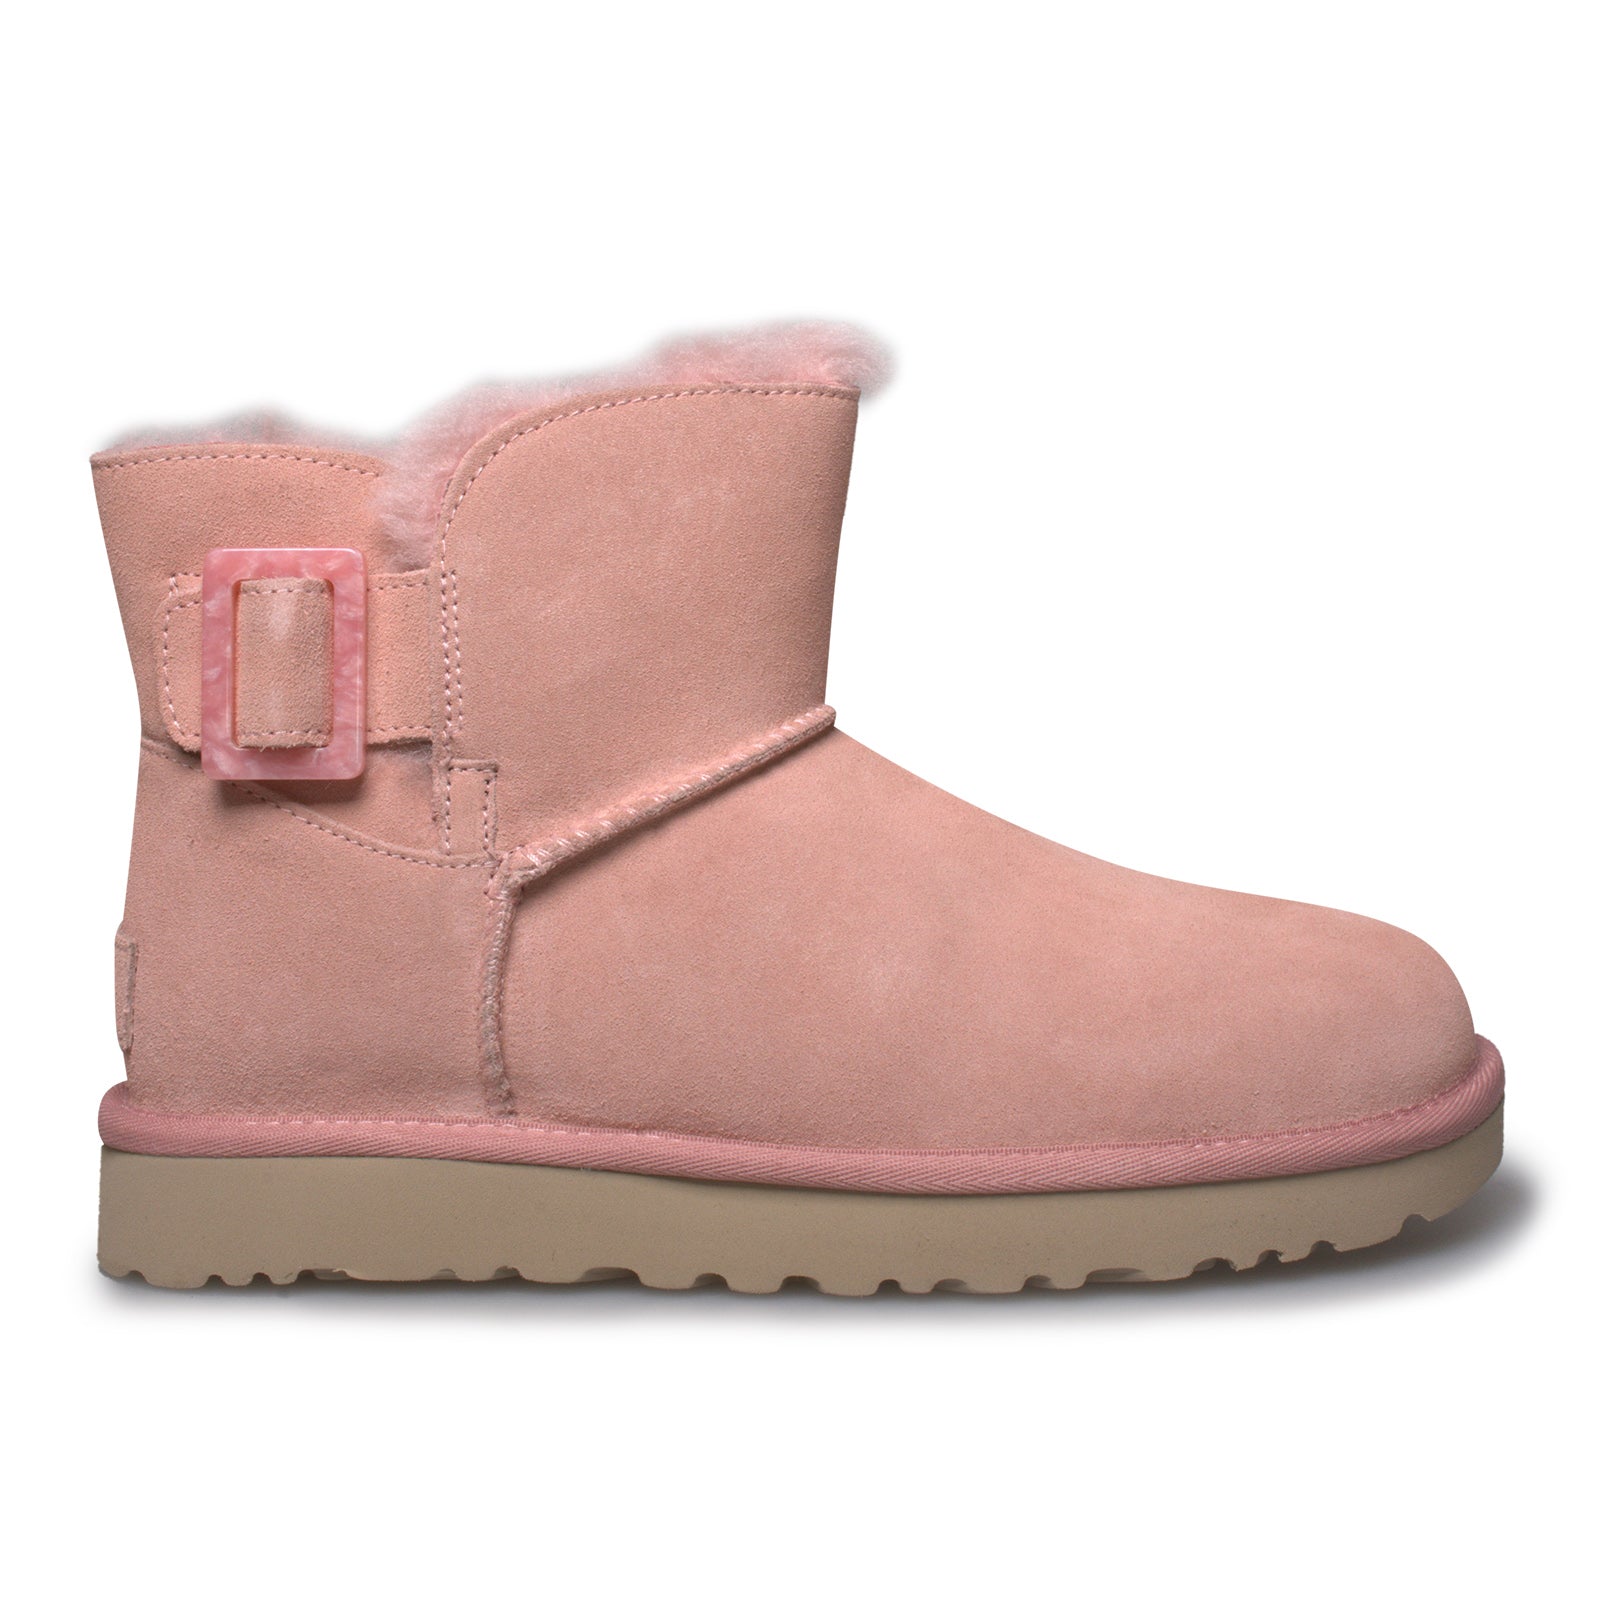 ugg boots with buckles